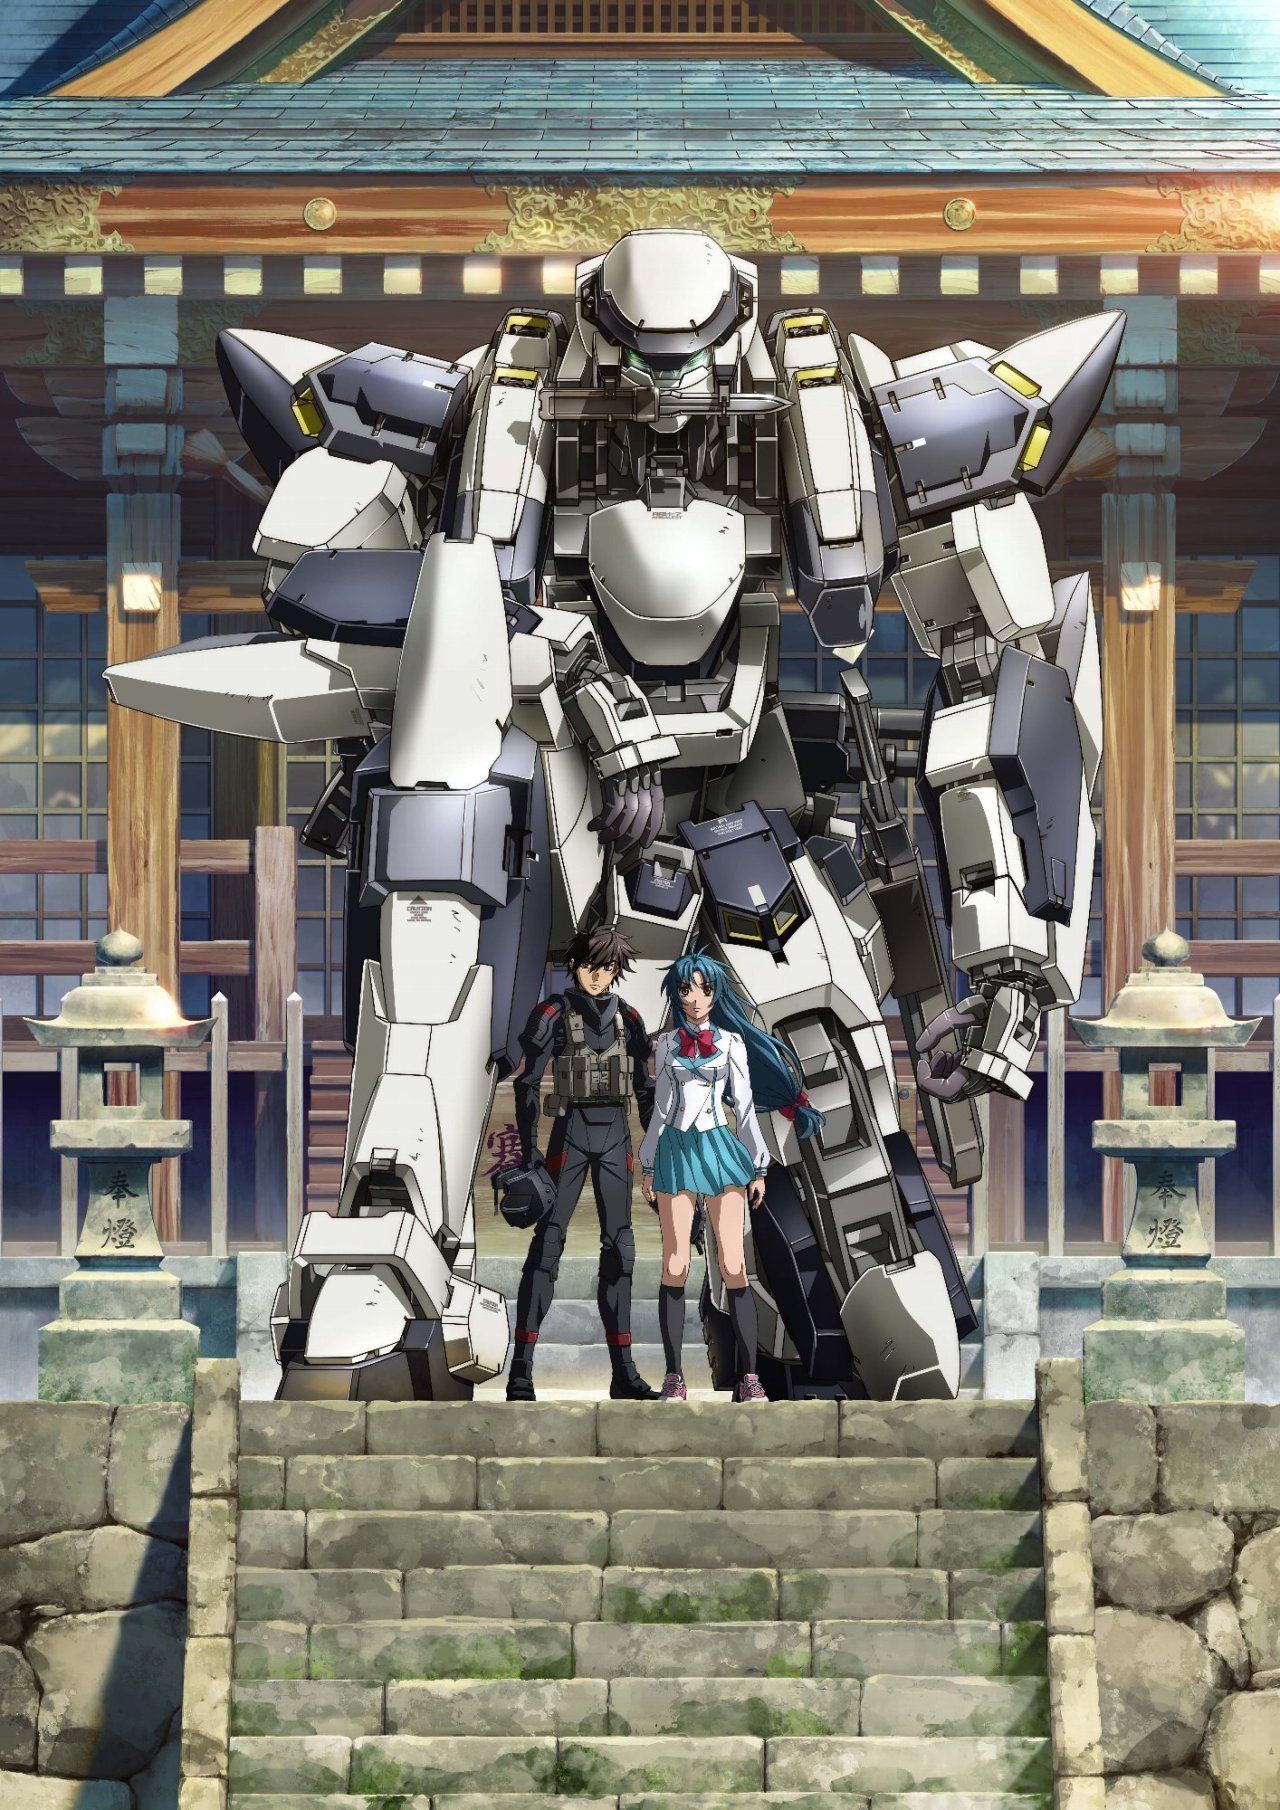 A part of me still cannot believe that Full Metal Panic! is actually getting another